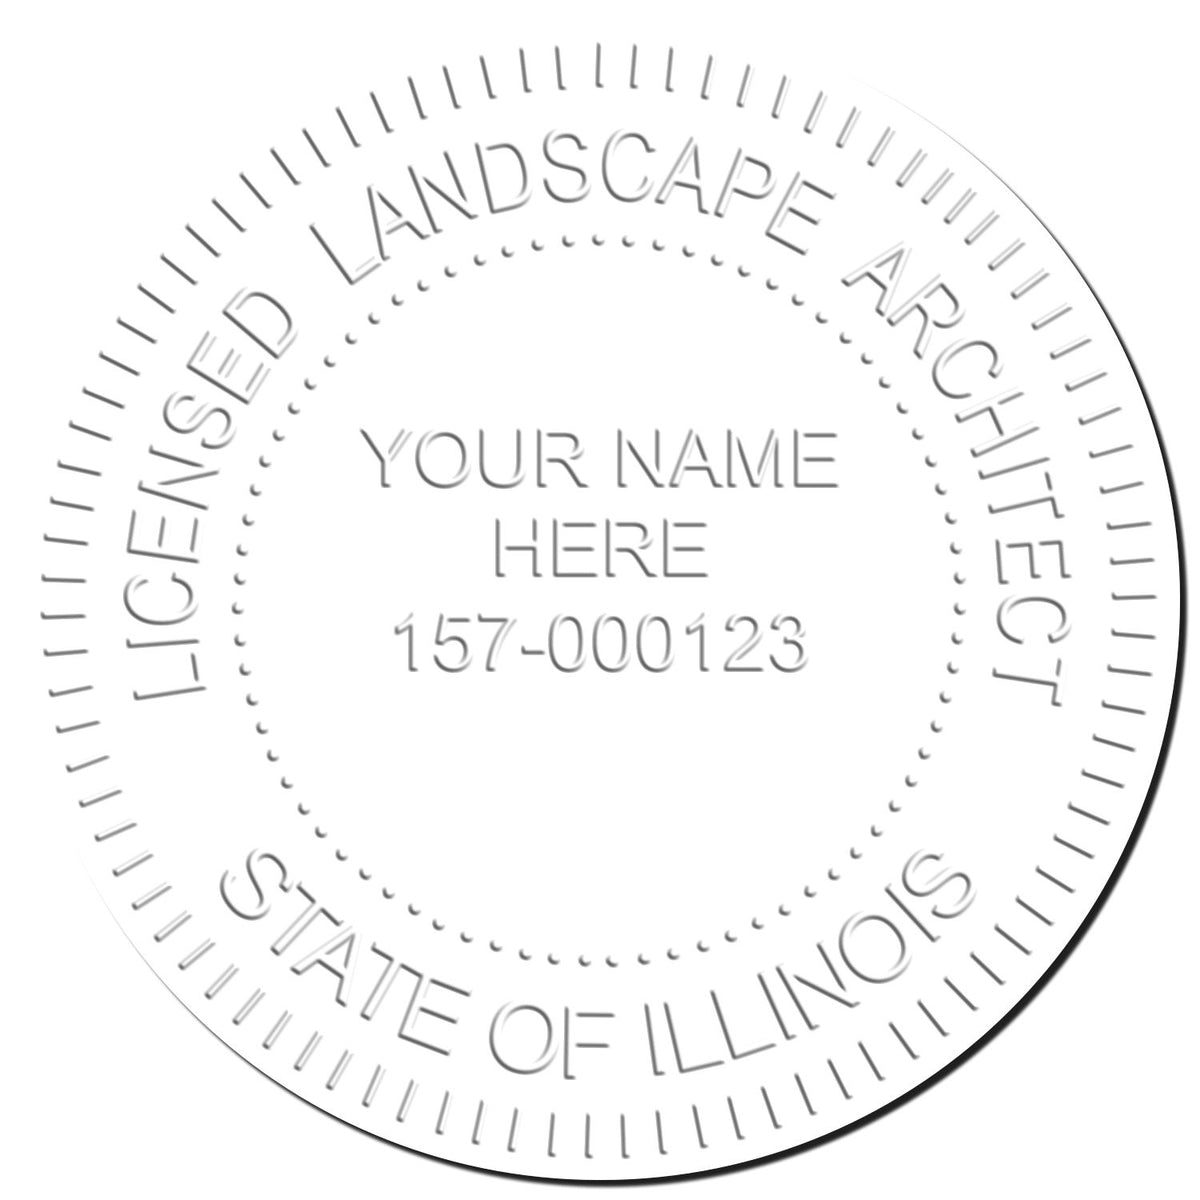 This paper is stamped with a sample imprint of the Hybrid Illinois Landscape Architect Seal, signifying its quality and reliability.